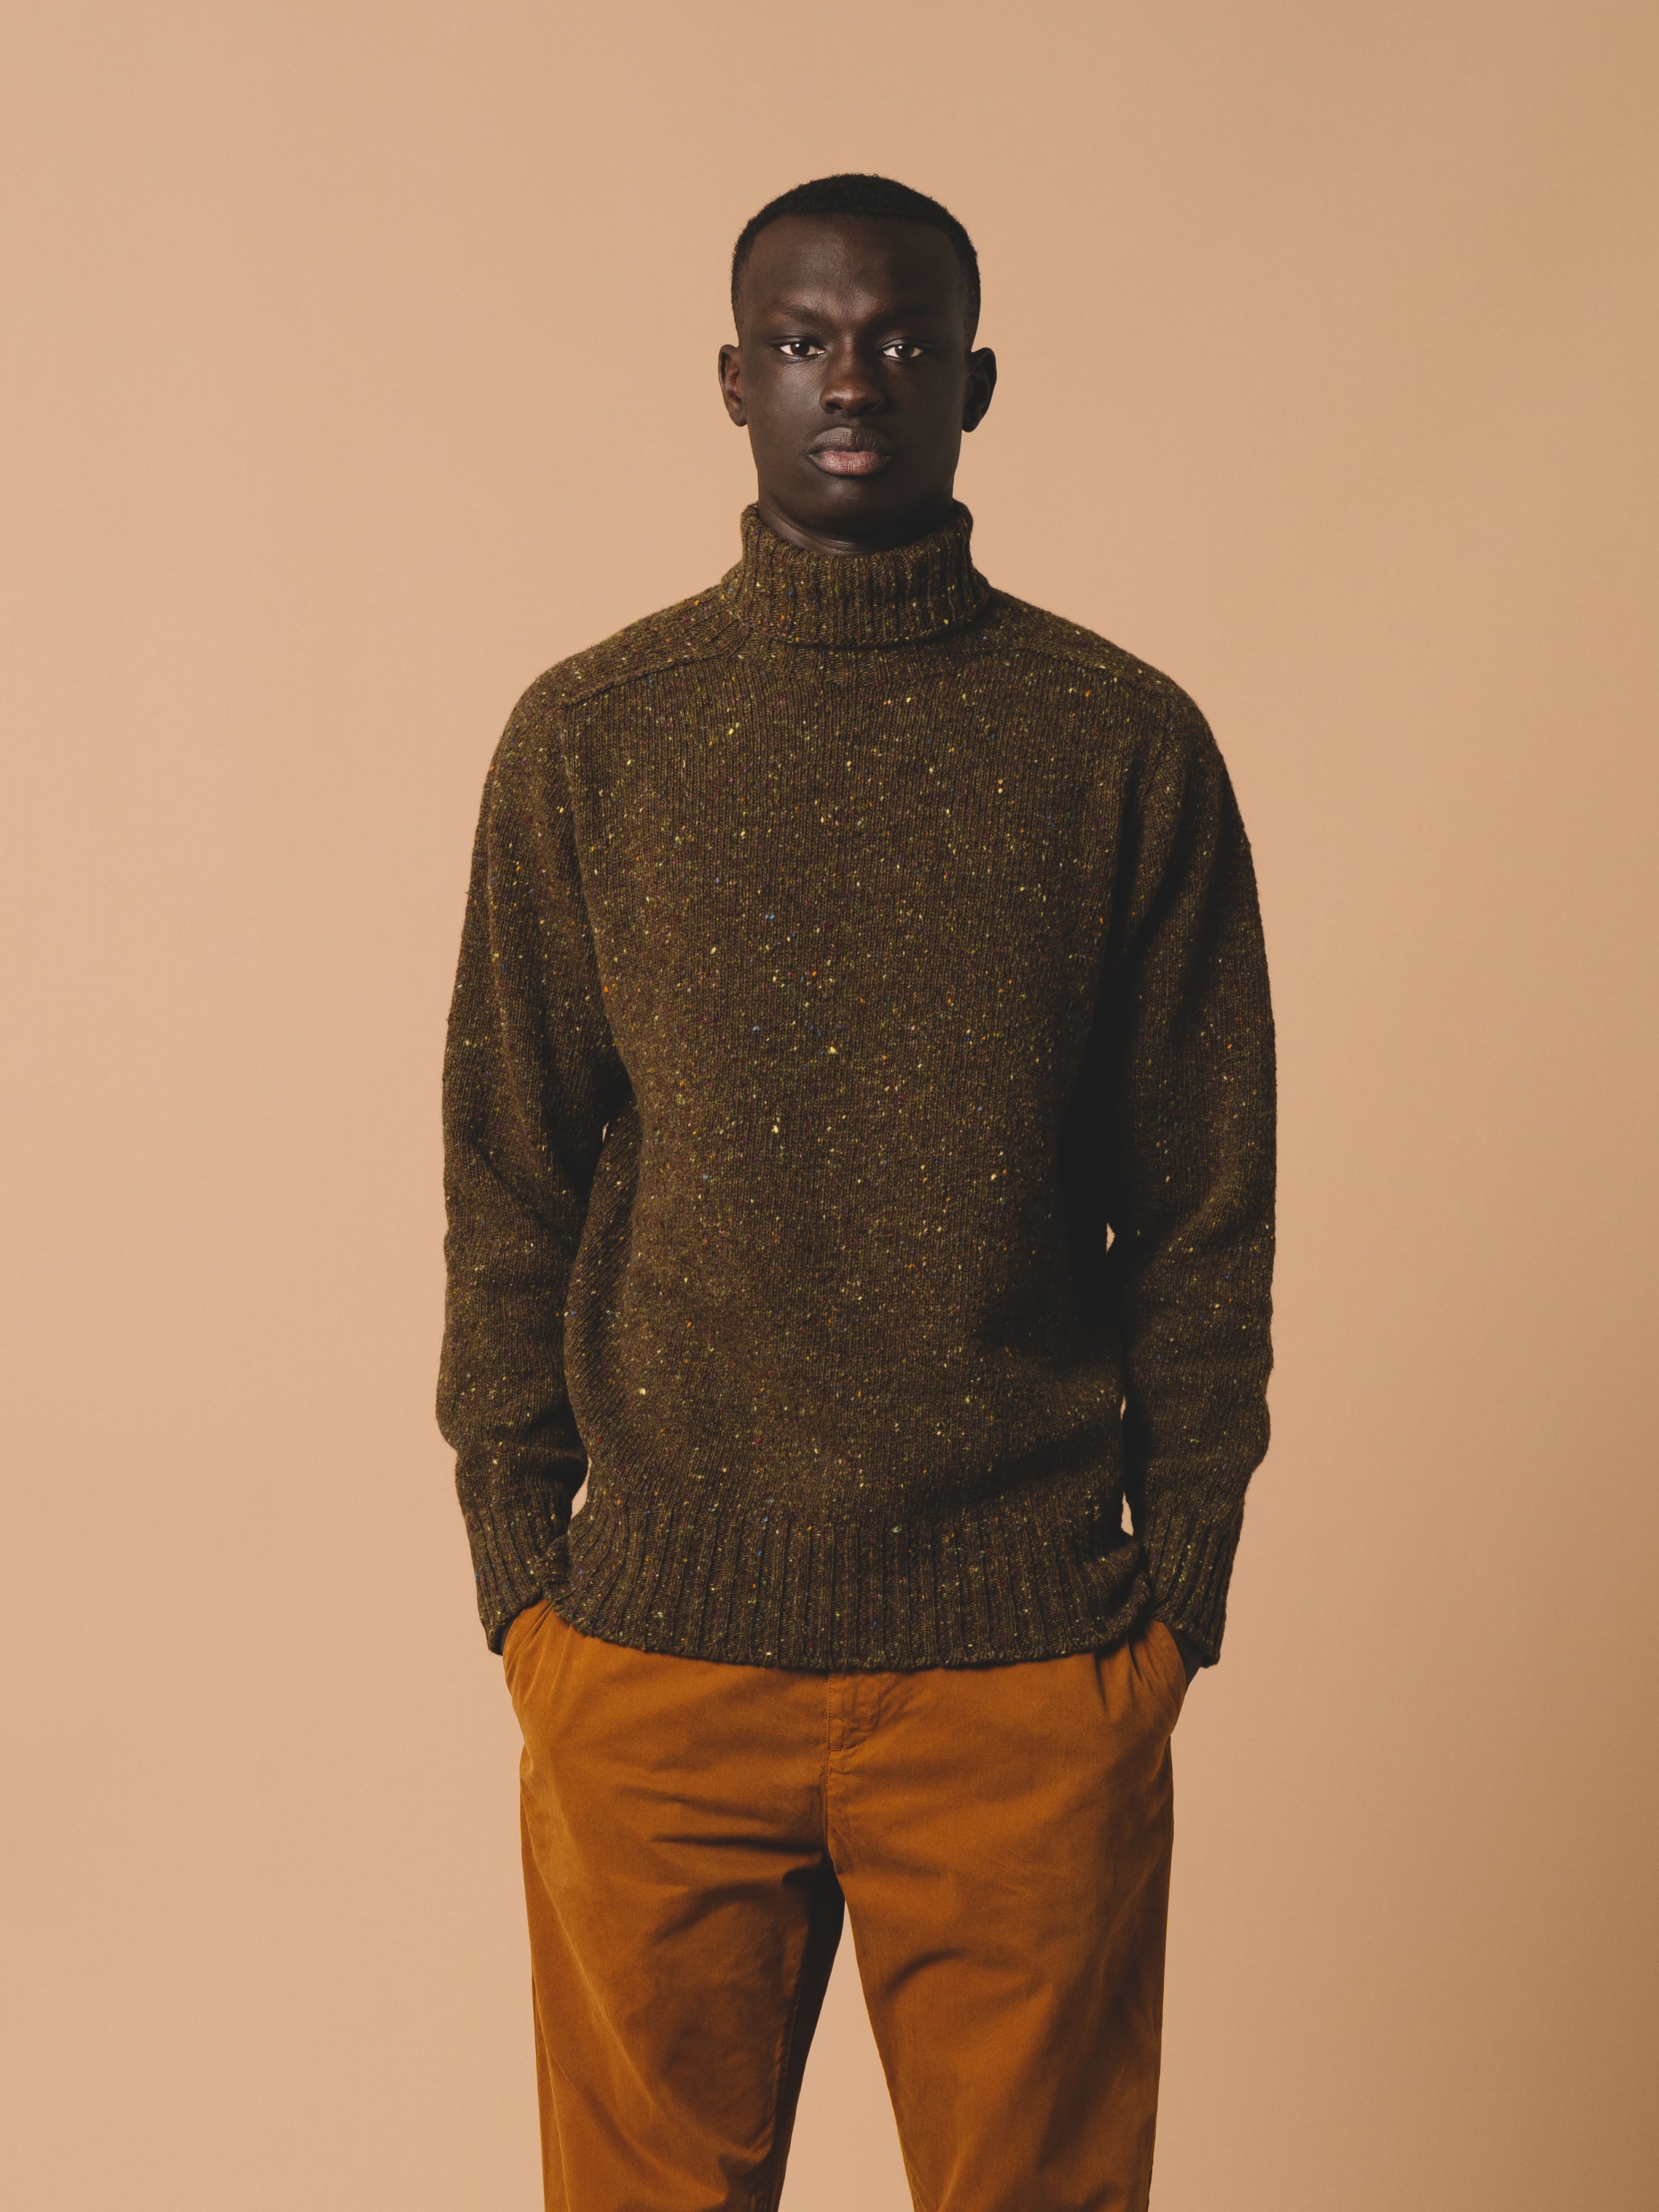 A man wearing a knitted Donegal wool sweater with a roll neck.